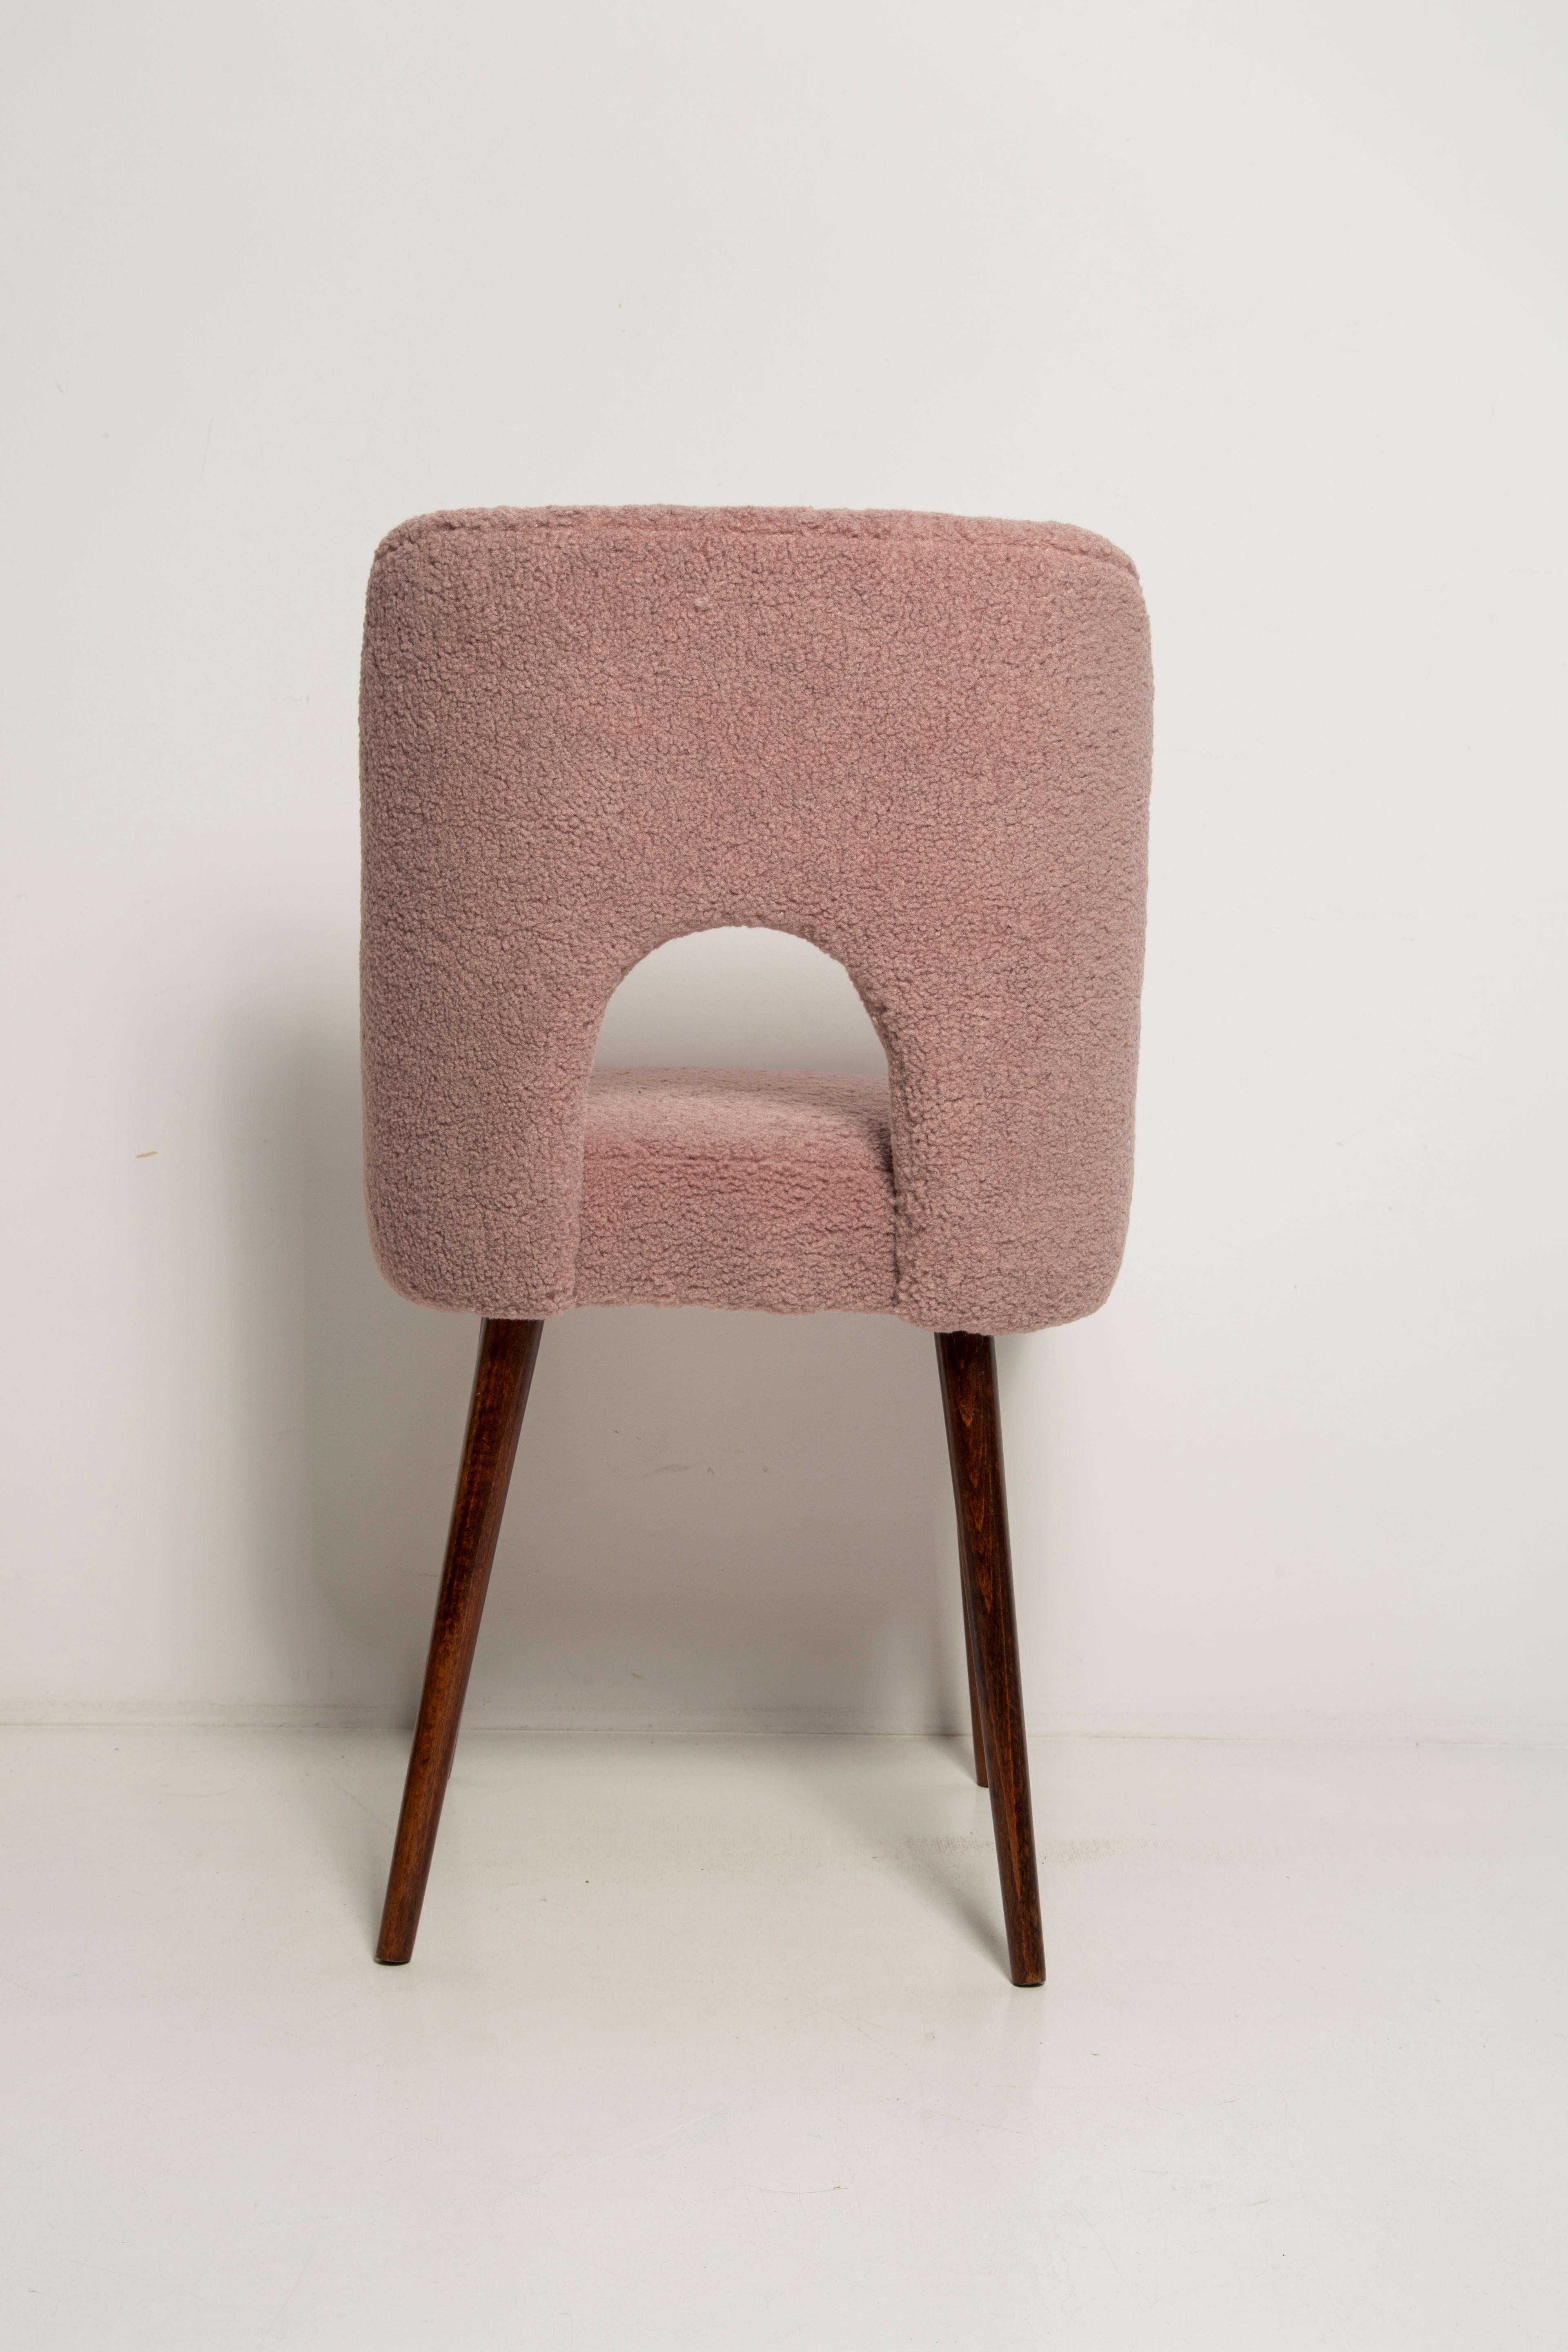 Set of Eight Pink Boucle 'Shell' Chairs, Europe, 1960s For Sale 2